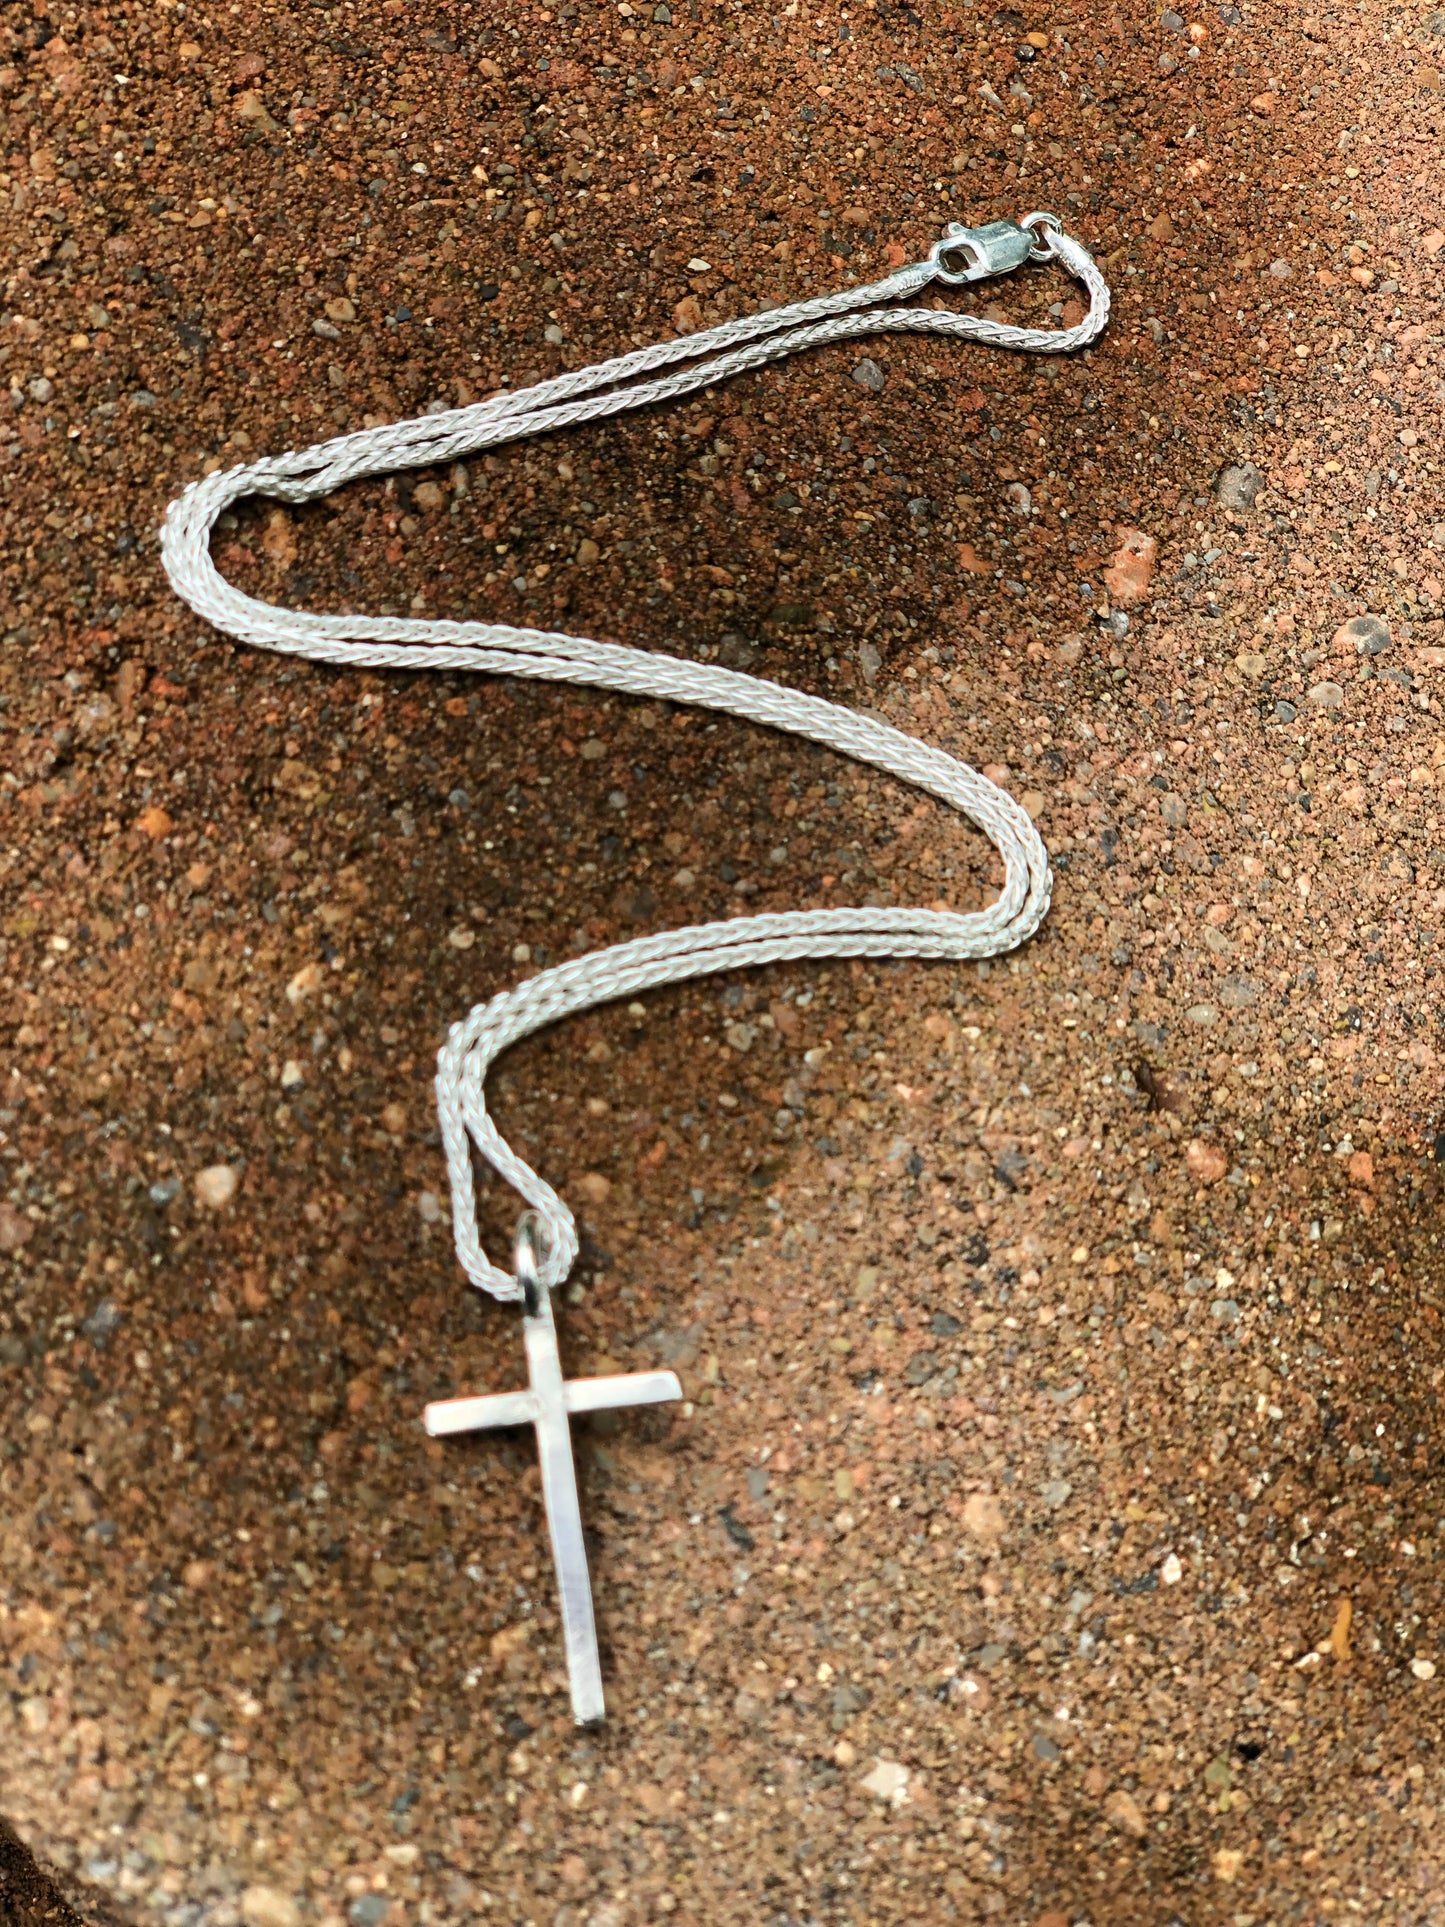 Silver cross necklace - collectionsbytracy.com